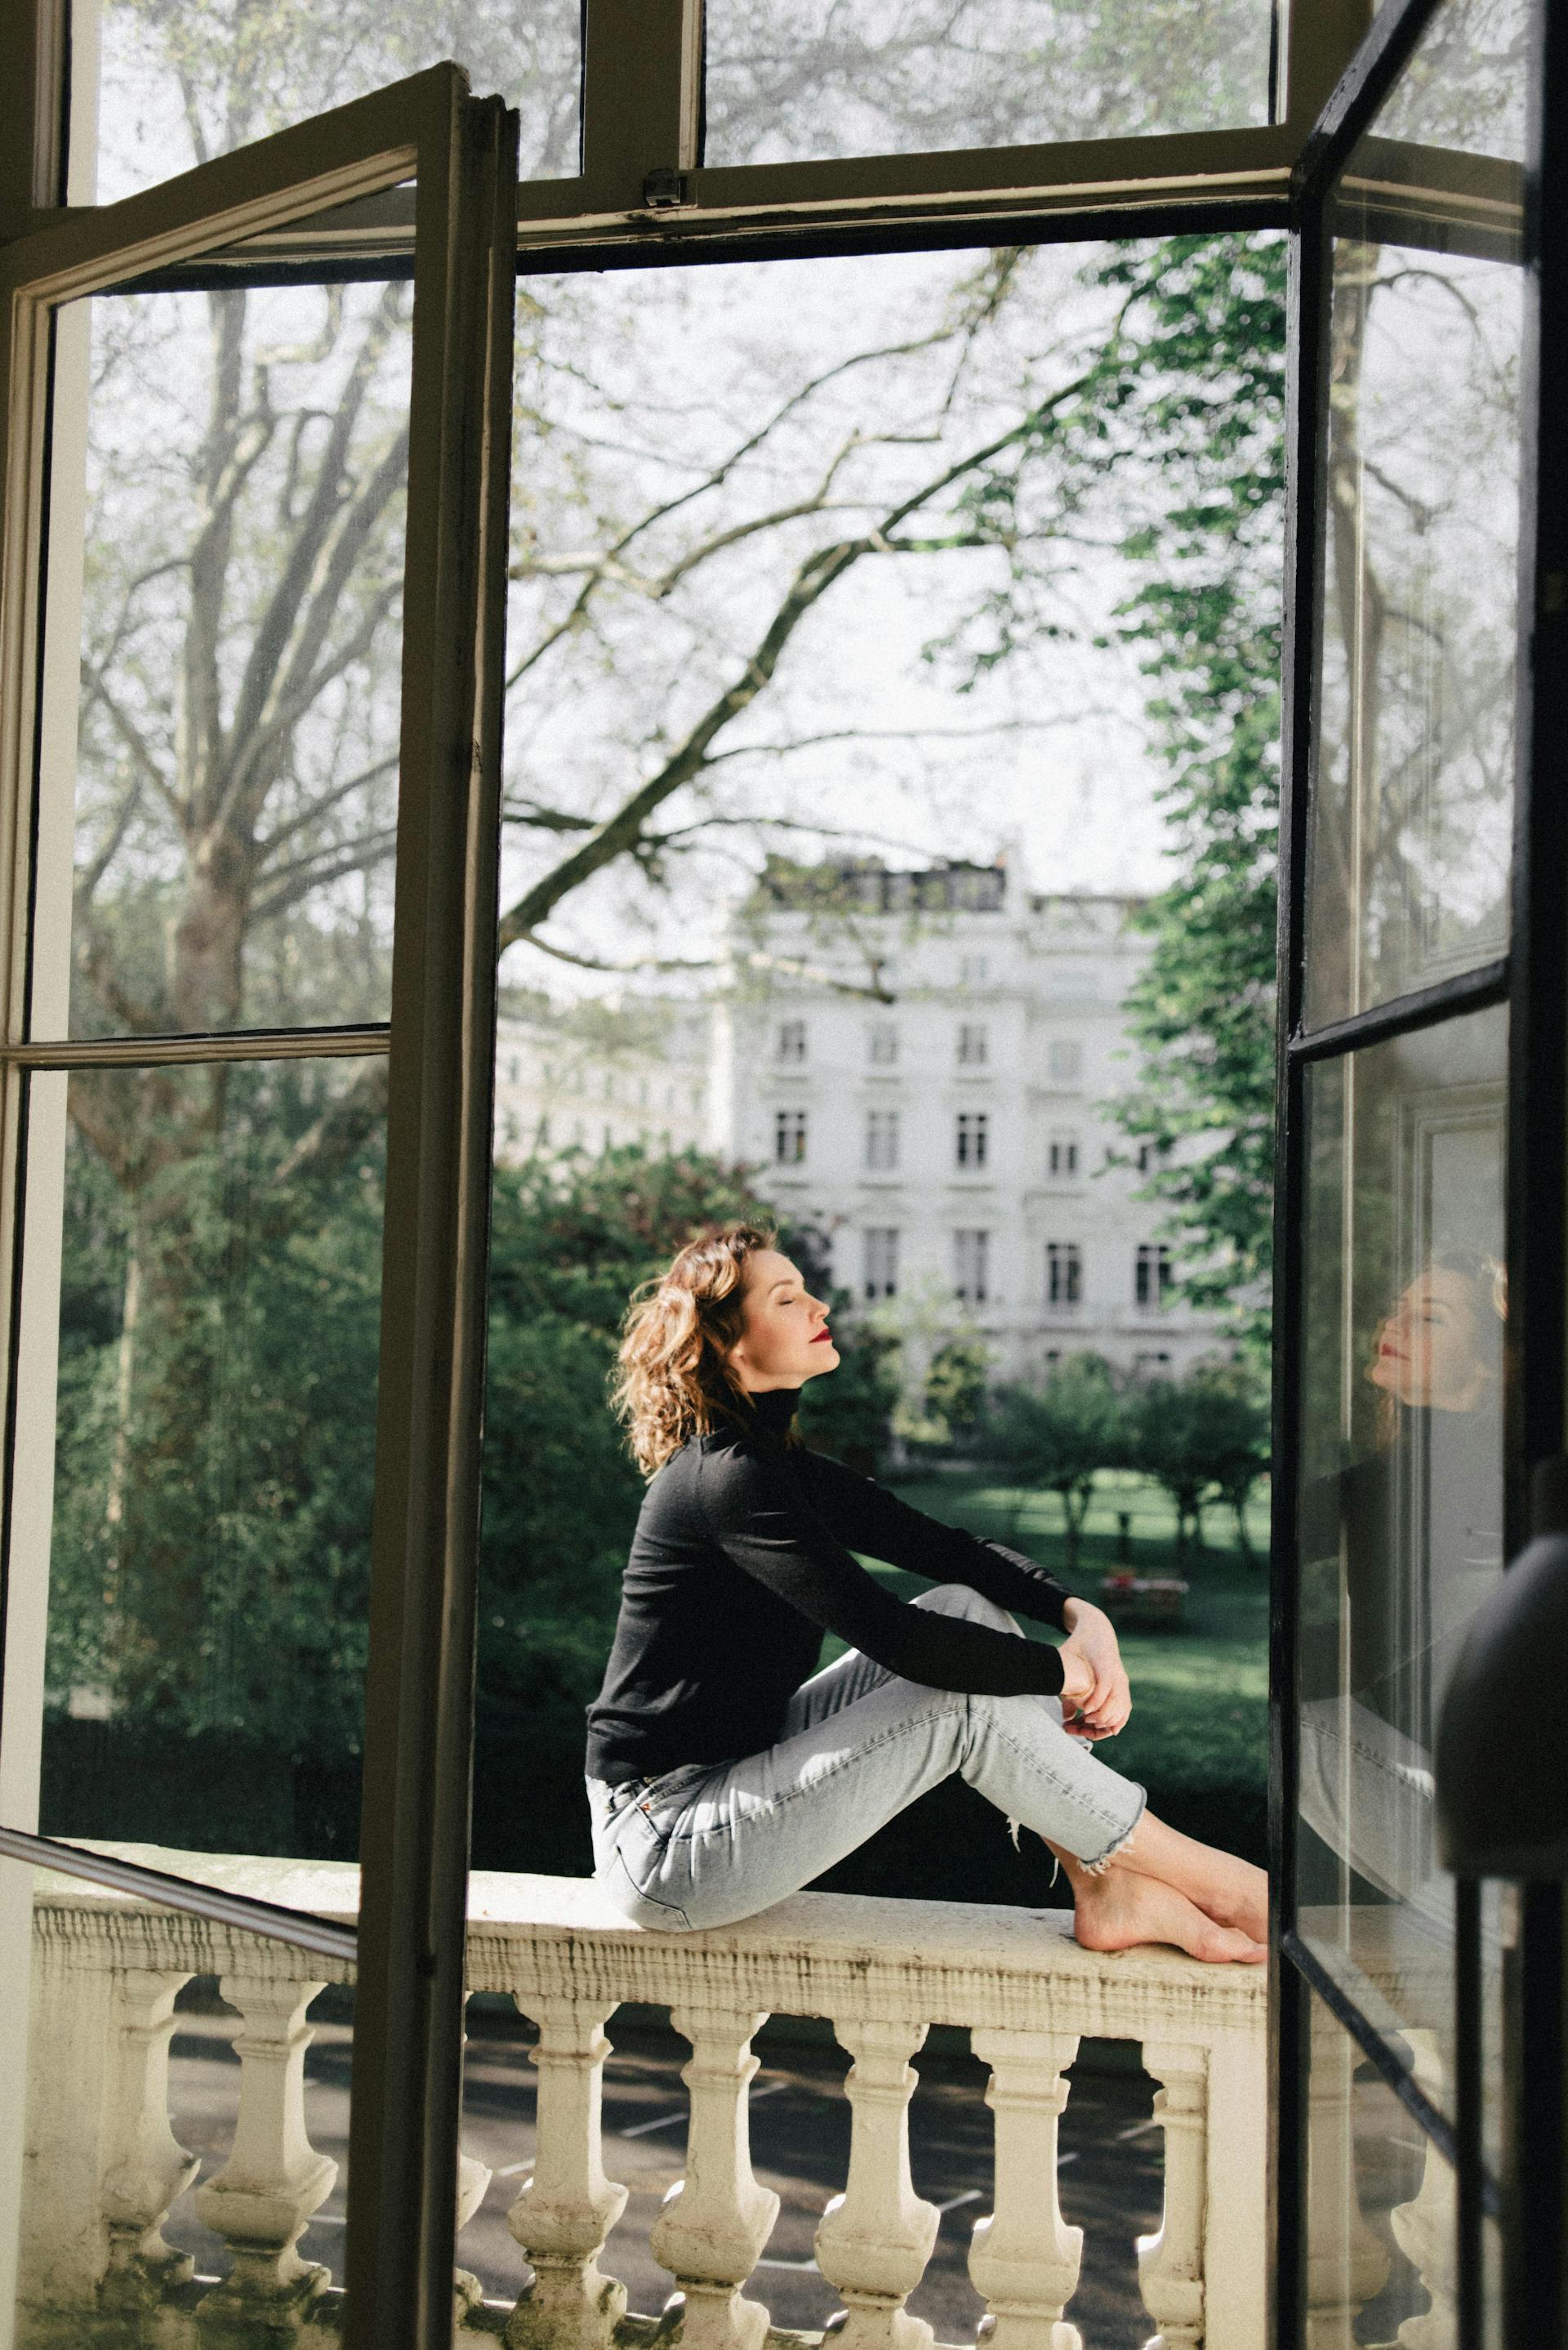 A woman sitting on a balcony | Source: Pexels